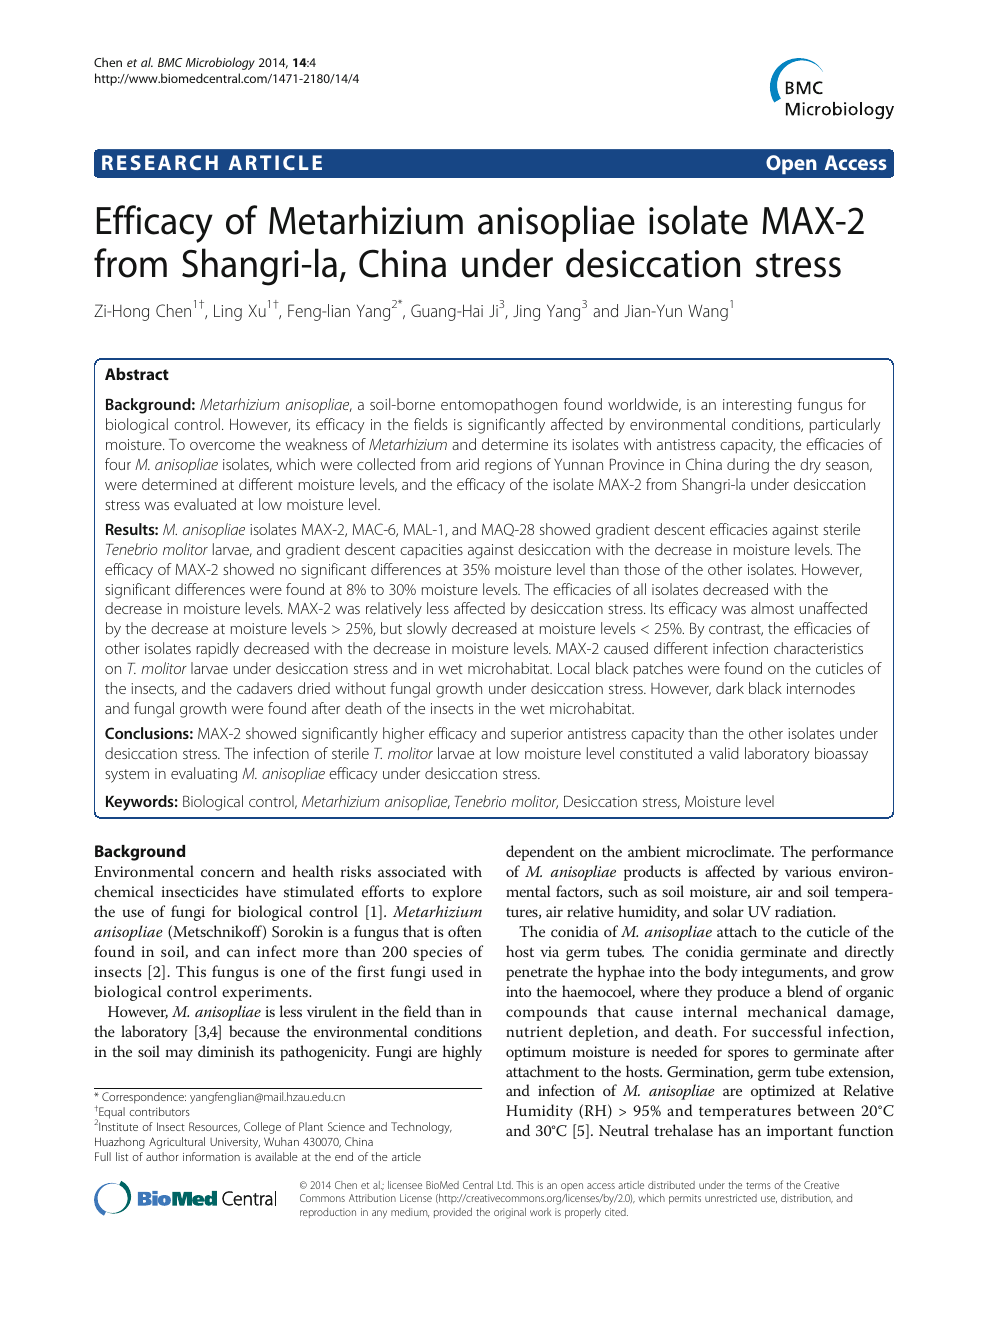 Efficacy Of Metarhizium Anisopliae Isolate Max 2 From Shangri La China Under Desiccation Stress Topic Of Research Paper In Biological Sciences Download Scholarly Article Pdf And Read For Free On Cyberleninka Open Science